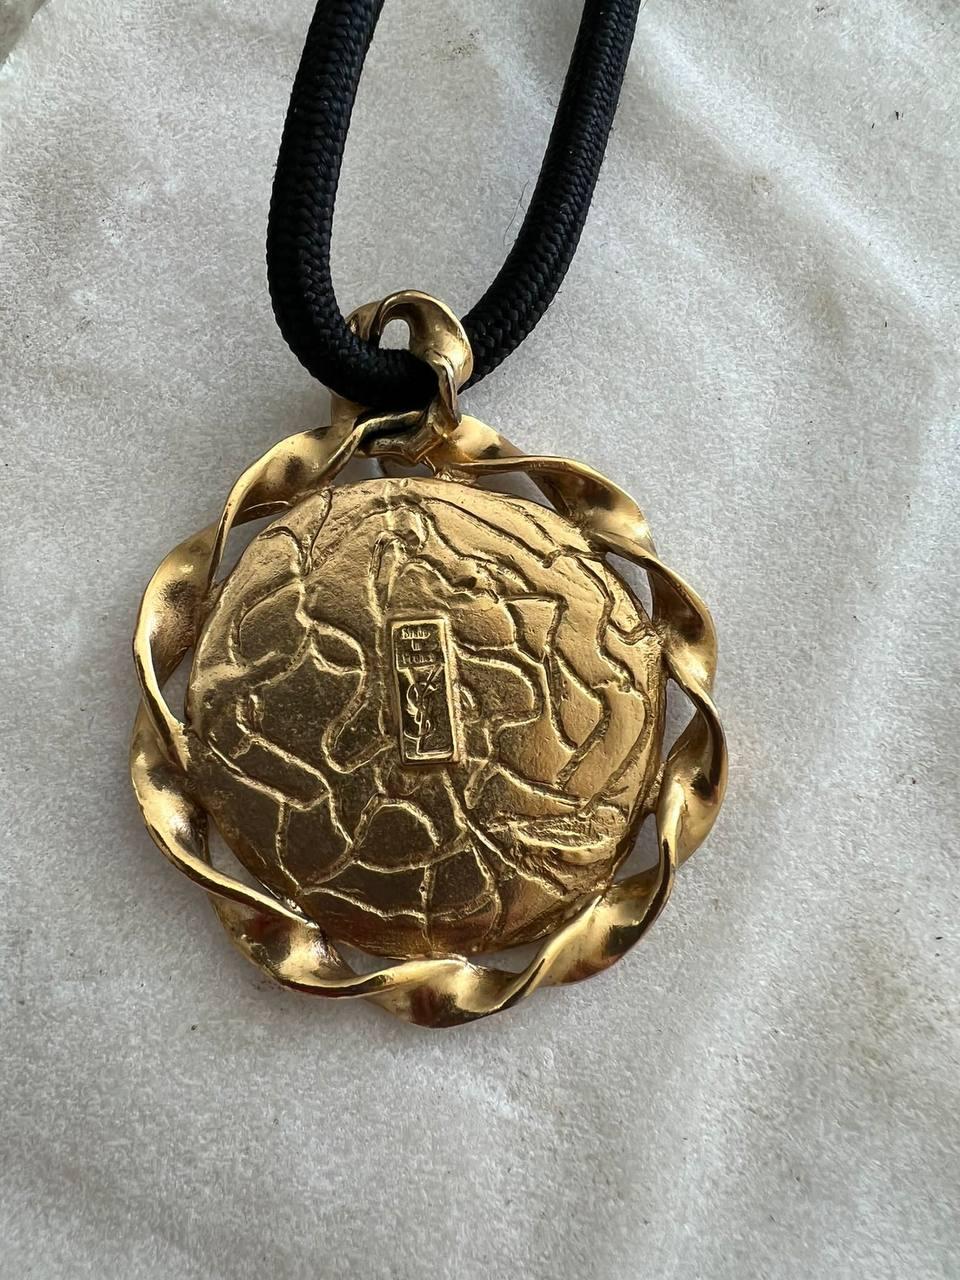 Vintage Yves Saint Laurent cord necklace with large medallion pendant. A thistle is engraved on the pendant made from gold-tone metal. 
Designed by Robert Goossens.  
Period: 1980s
Condition: very good. 
Dimensions:
Chain Length 25